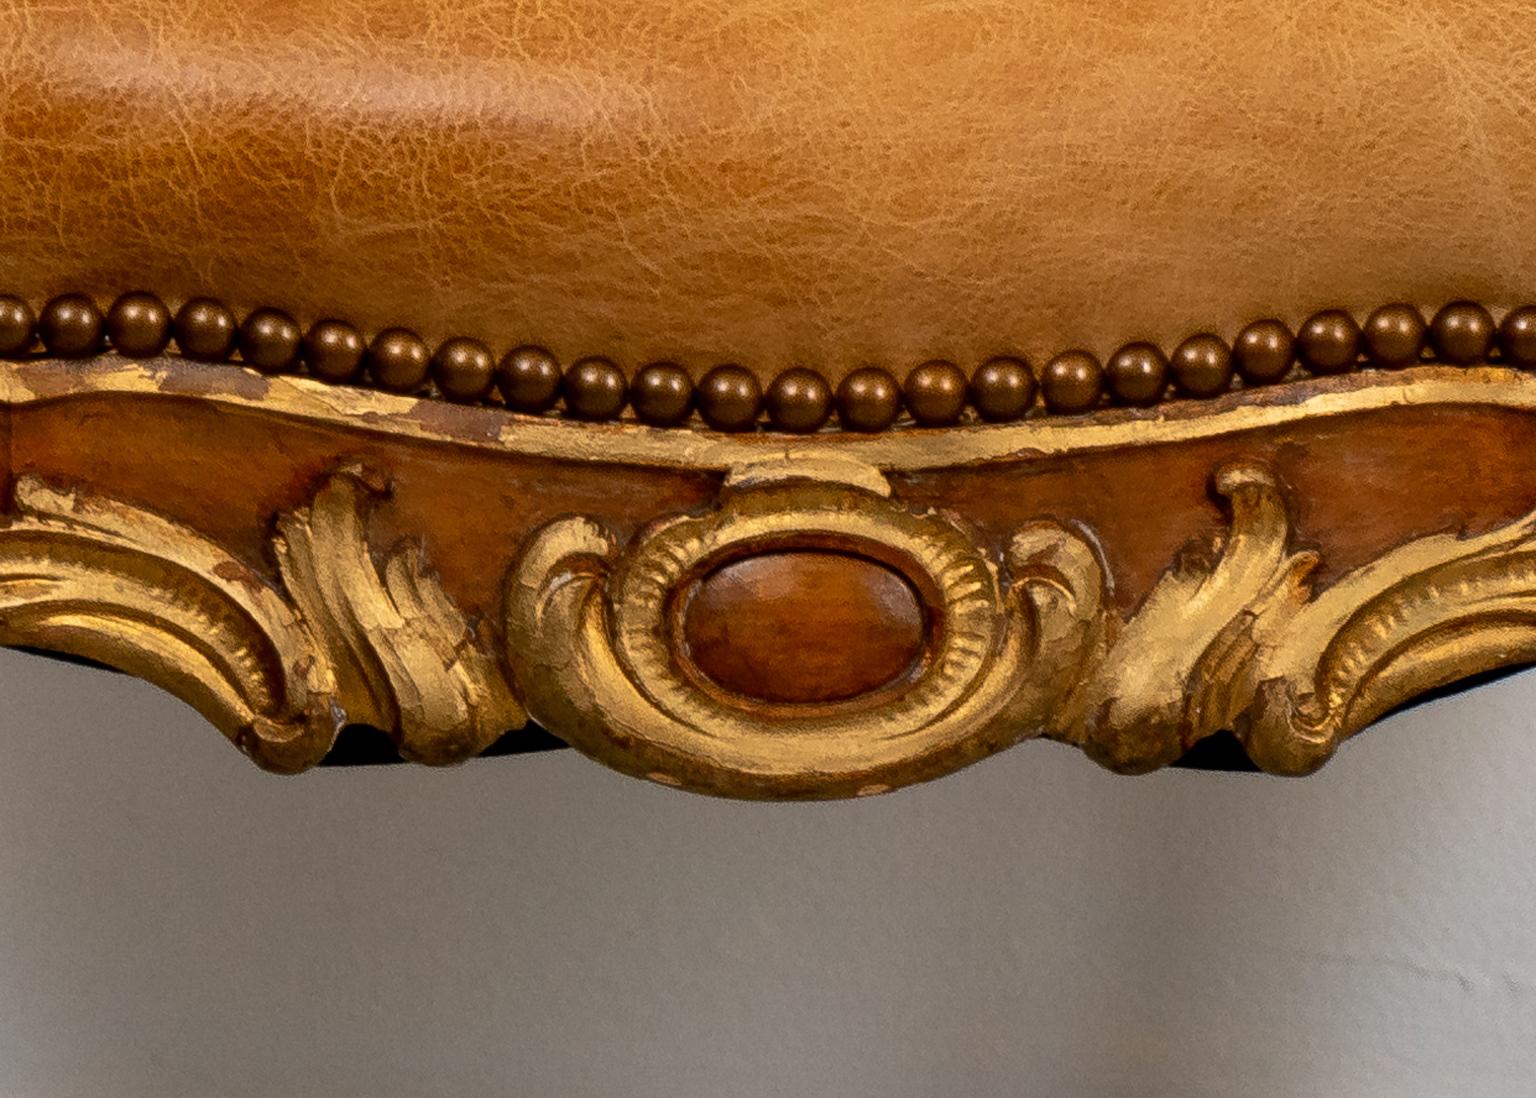 Circa 1900s pair of Italian Rococo style footstools with pegged construction, newly upholstered in leather with dark wood on the legs and lighter wood on the apron. The piece also features slight cabriole legs with carved knees and apron detailed